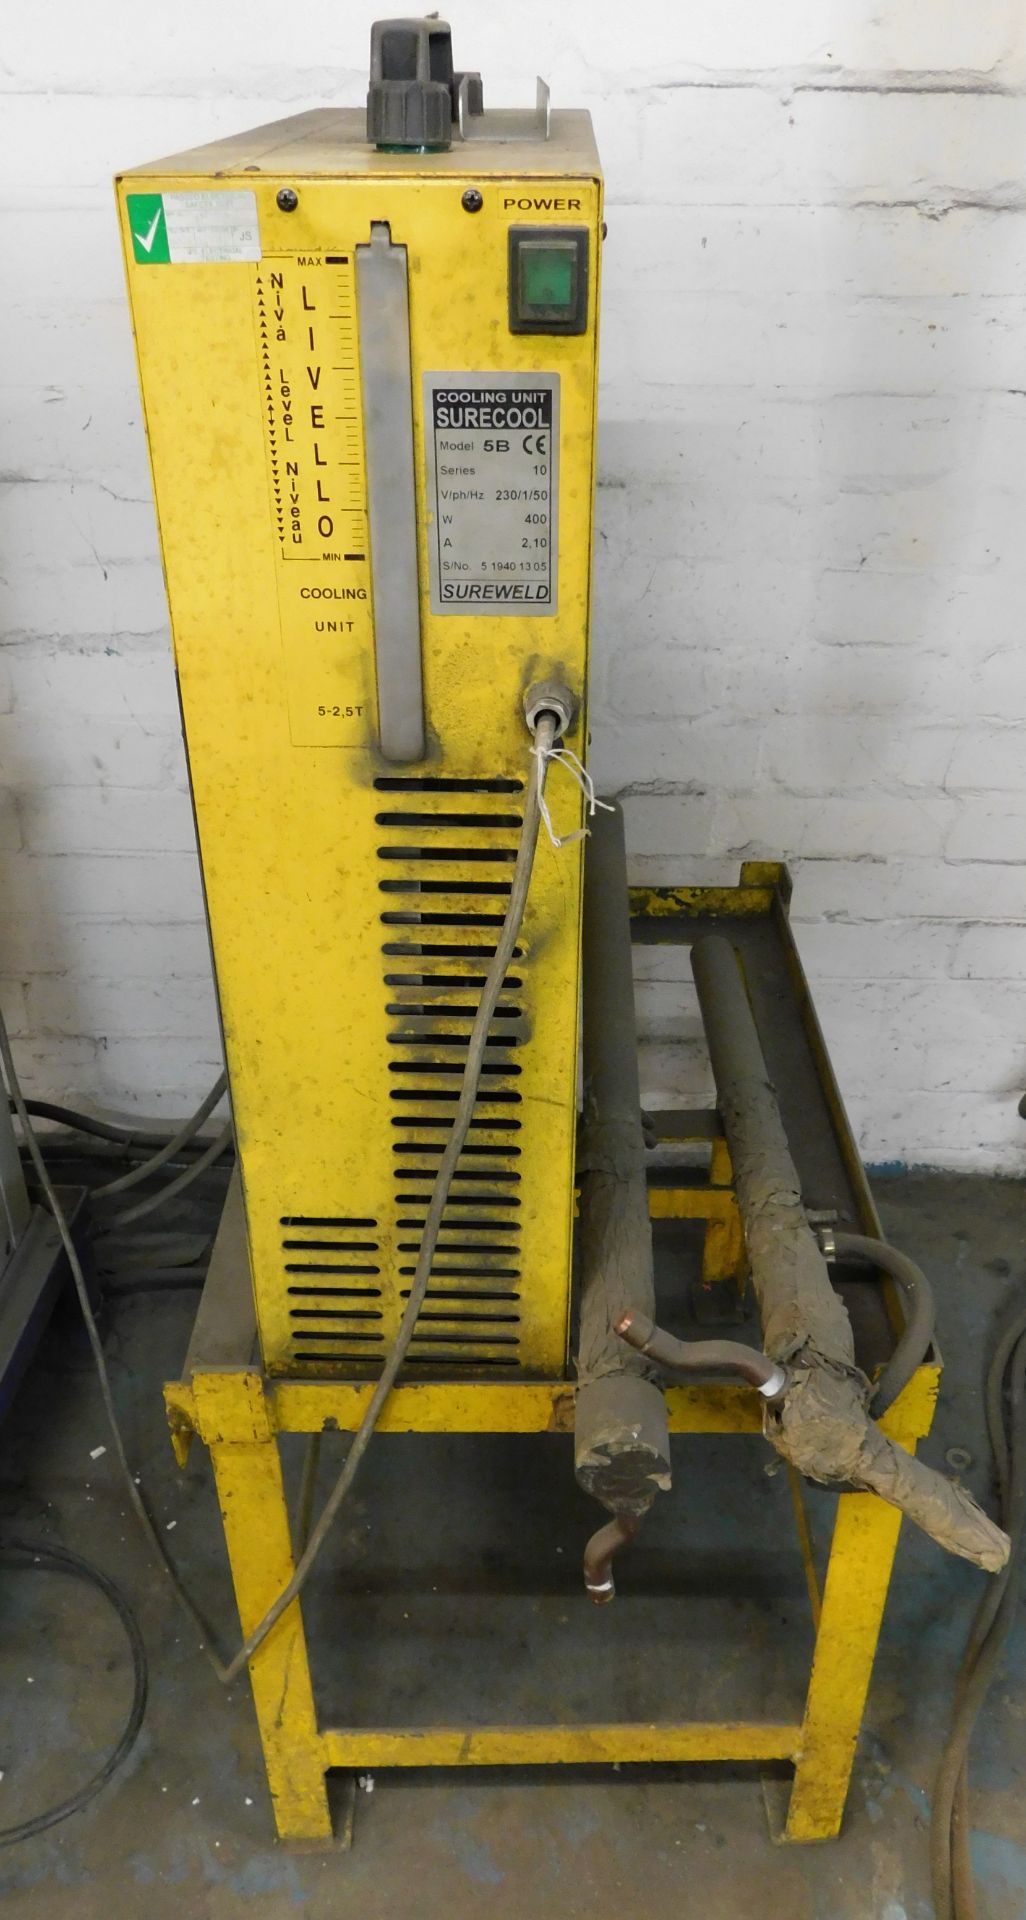 Lecco Type ZP 26 Spot Welder, Serial Number IE318 003 with Sureweld Surecool Model 5B Cooling - Image 4 of 6